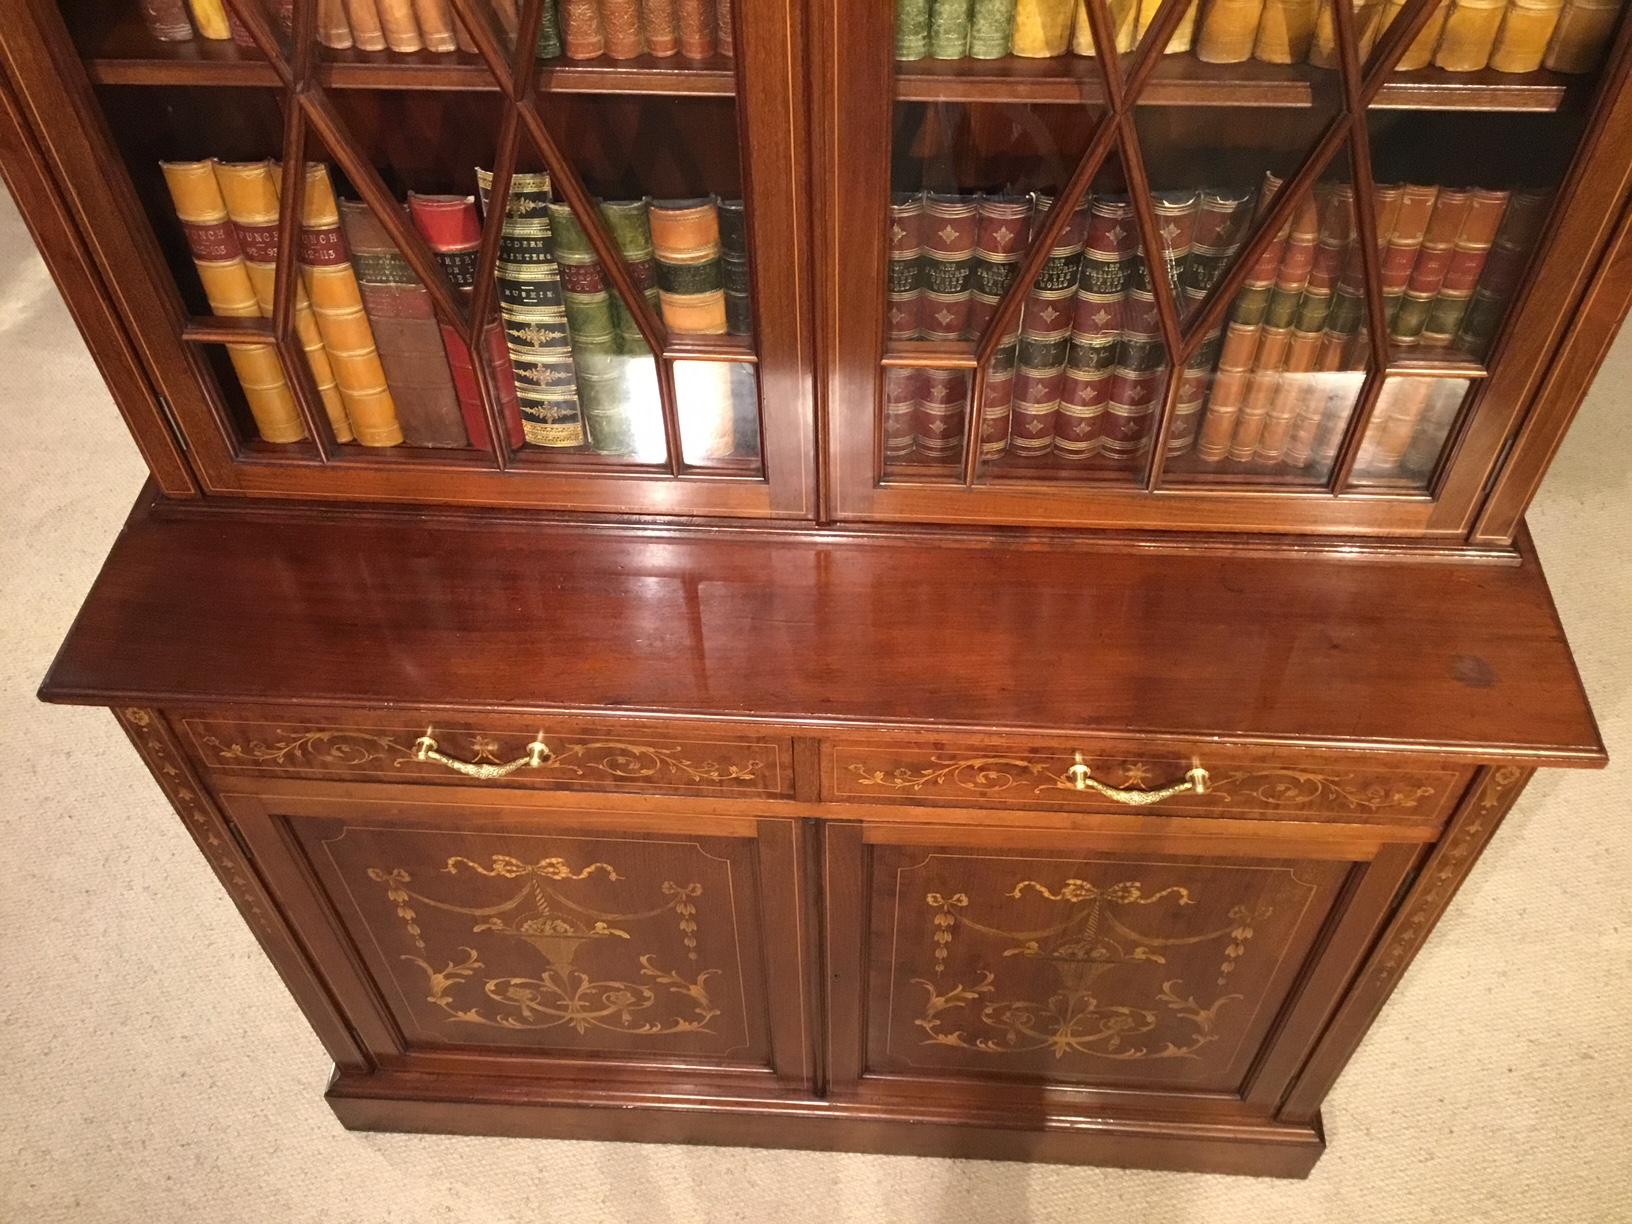  Marquetry Inlaid Edwardian Period Antique Bookcase 2